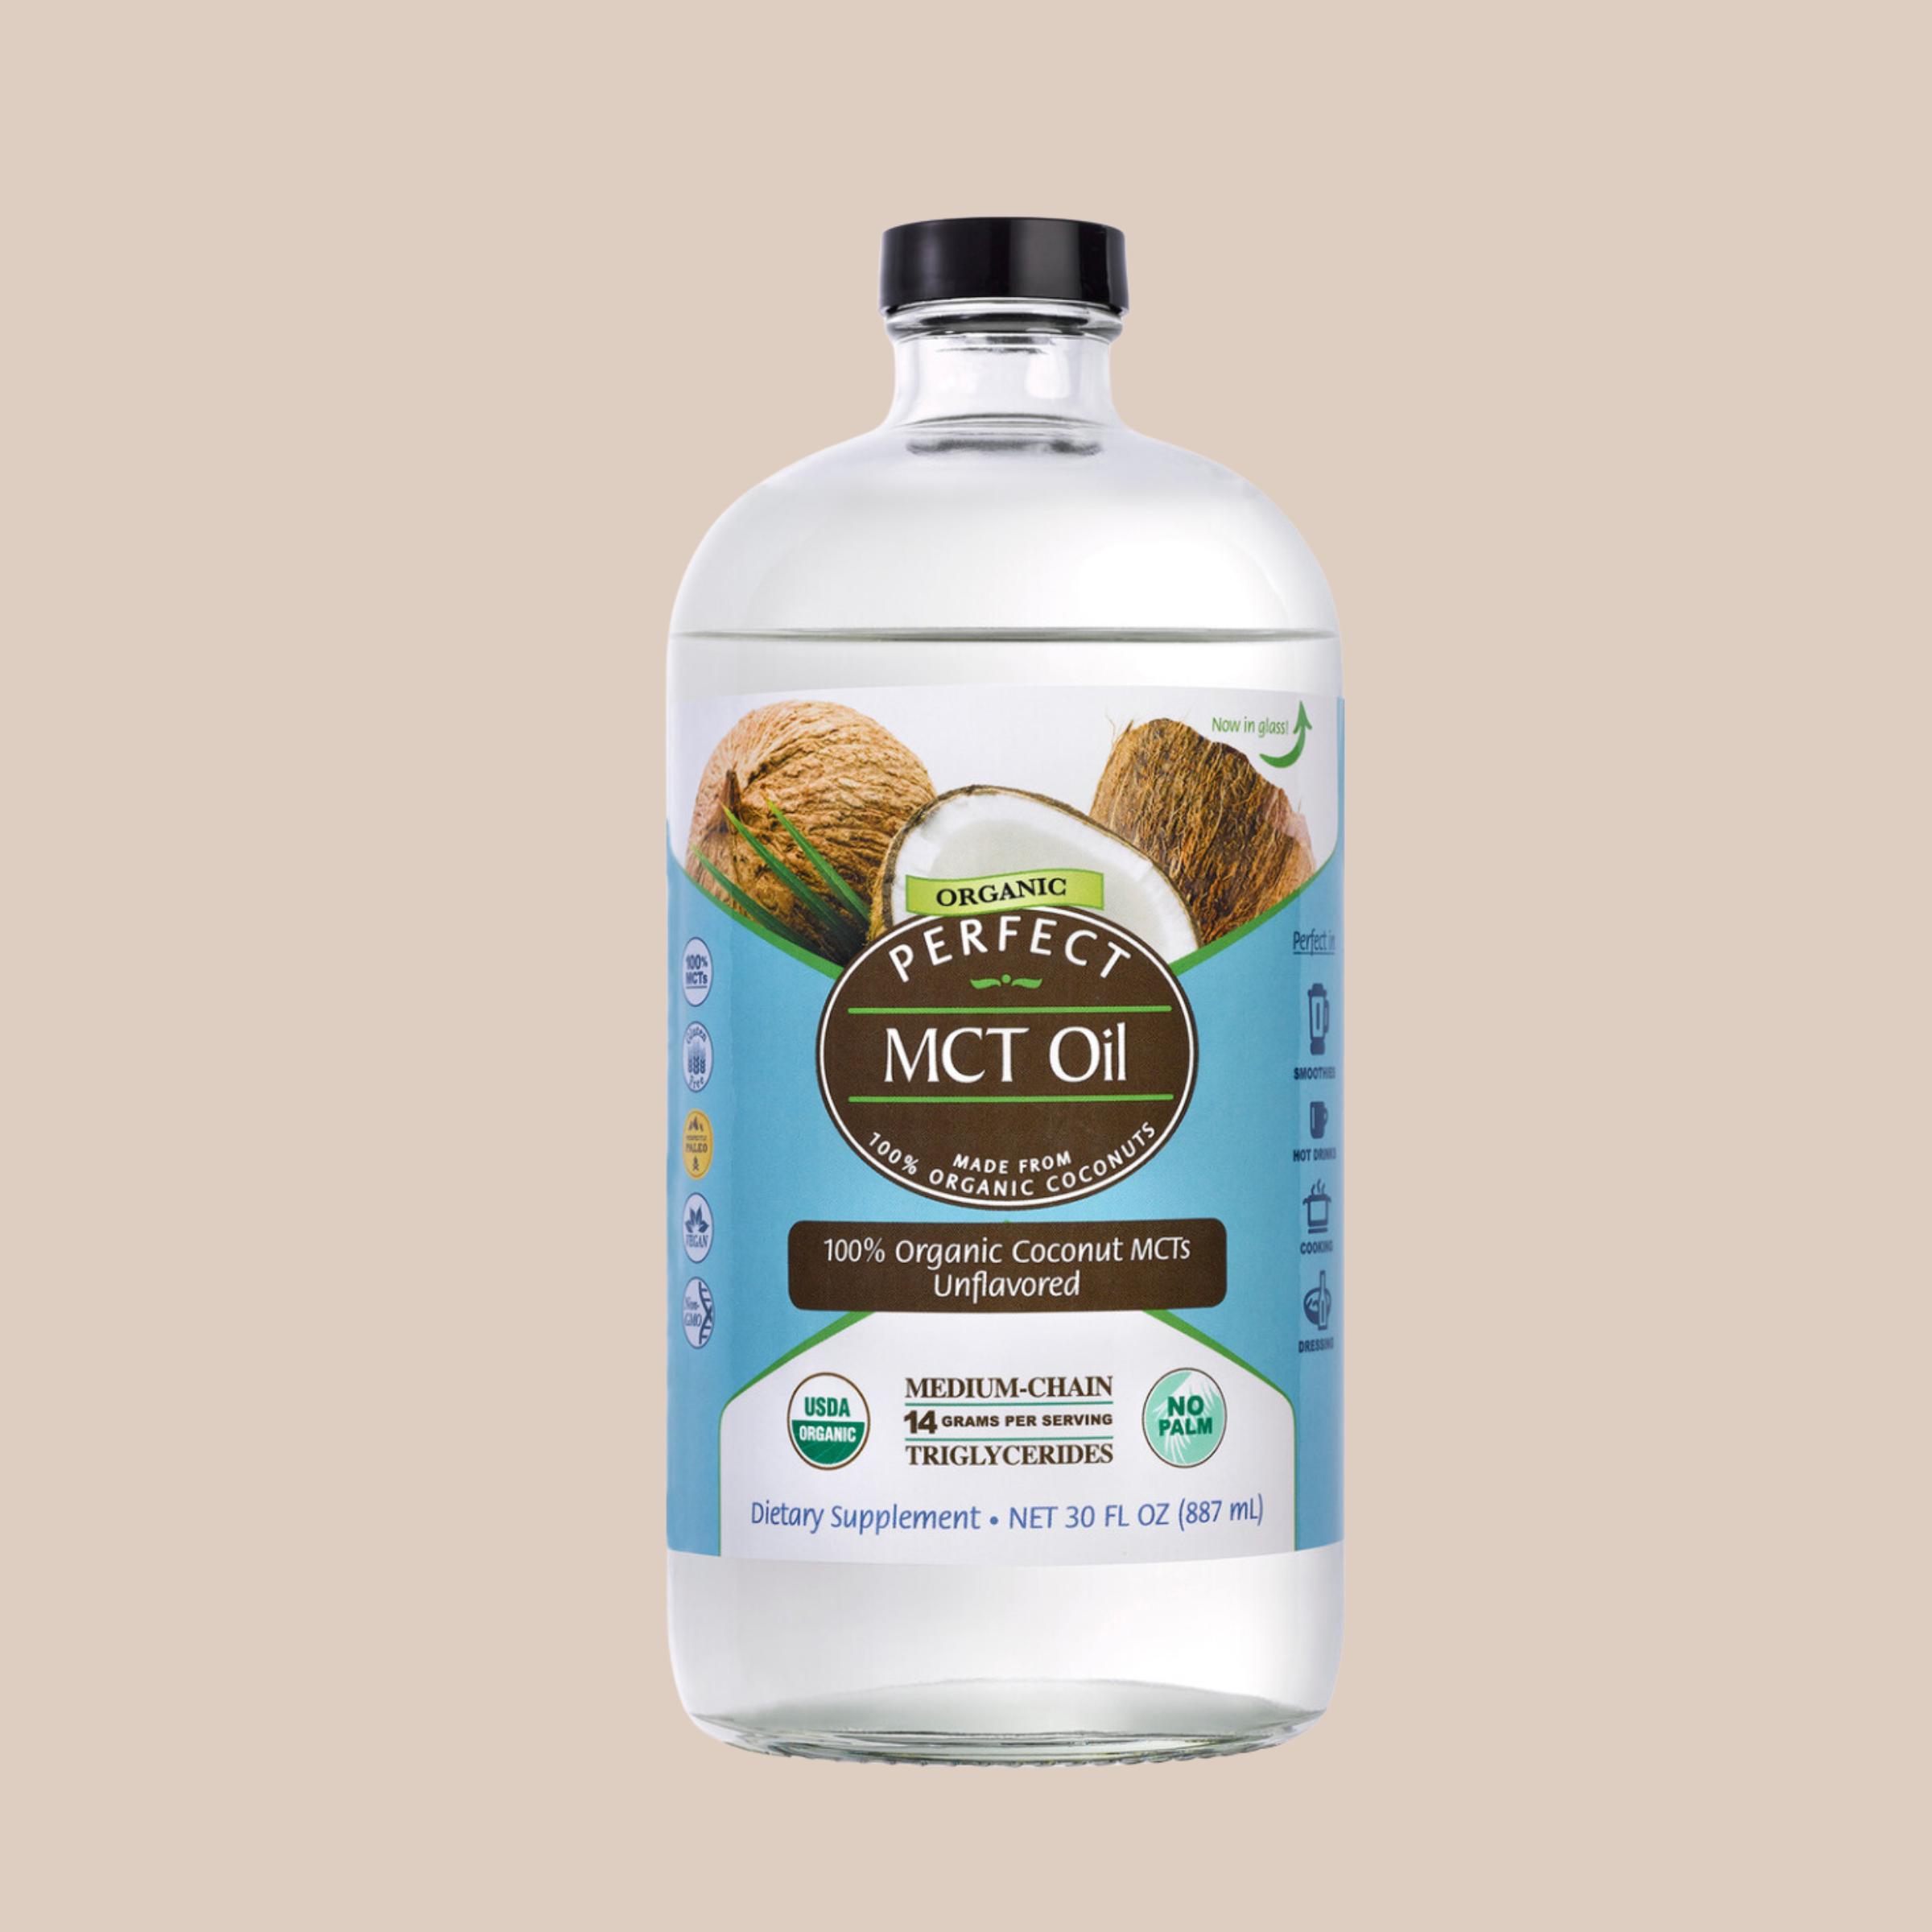 MCT Oil - 100% Organic Coconut MCTs